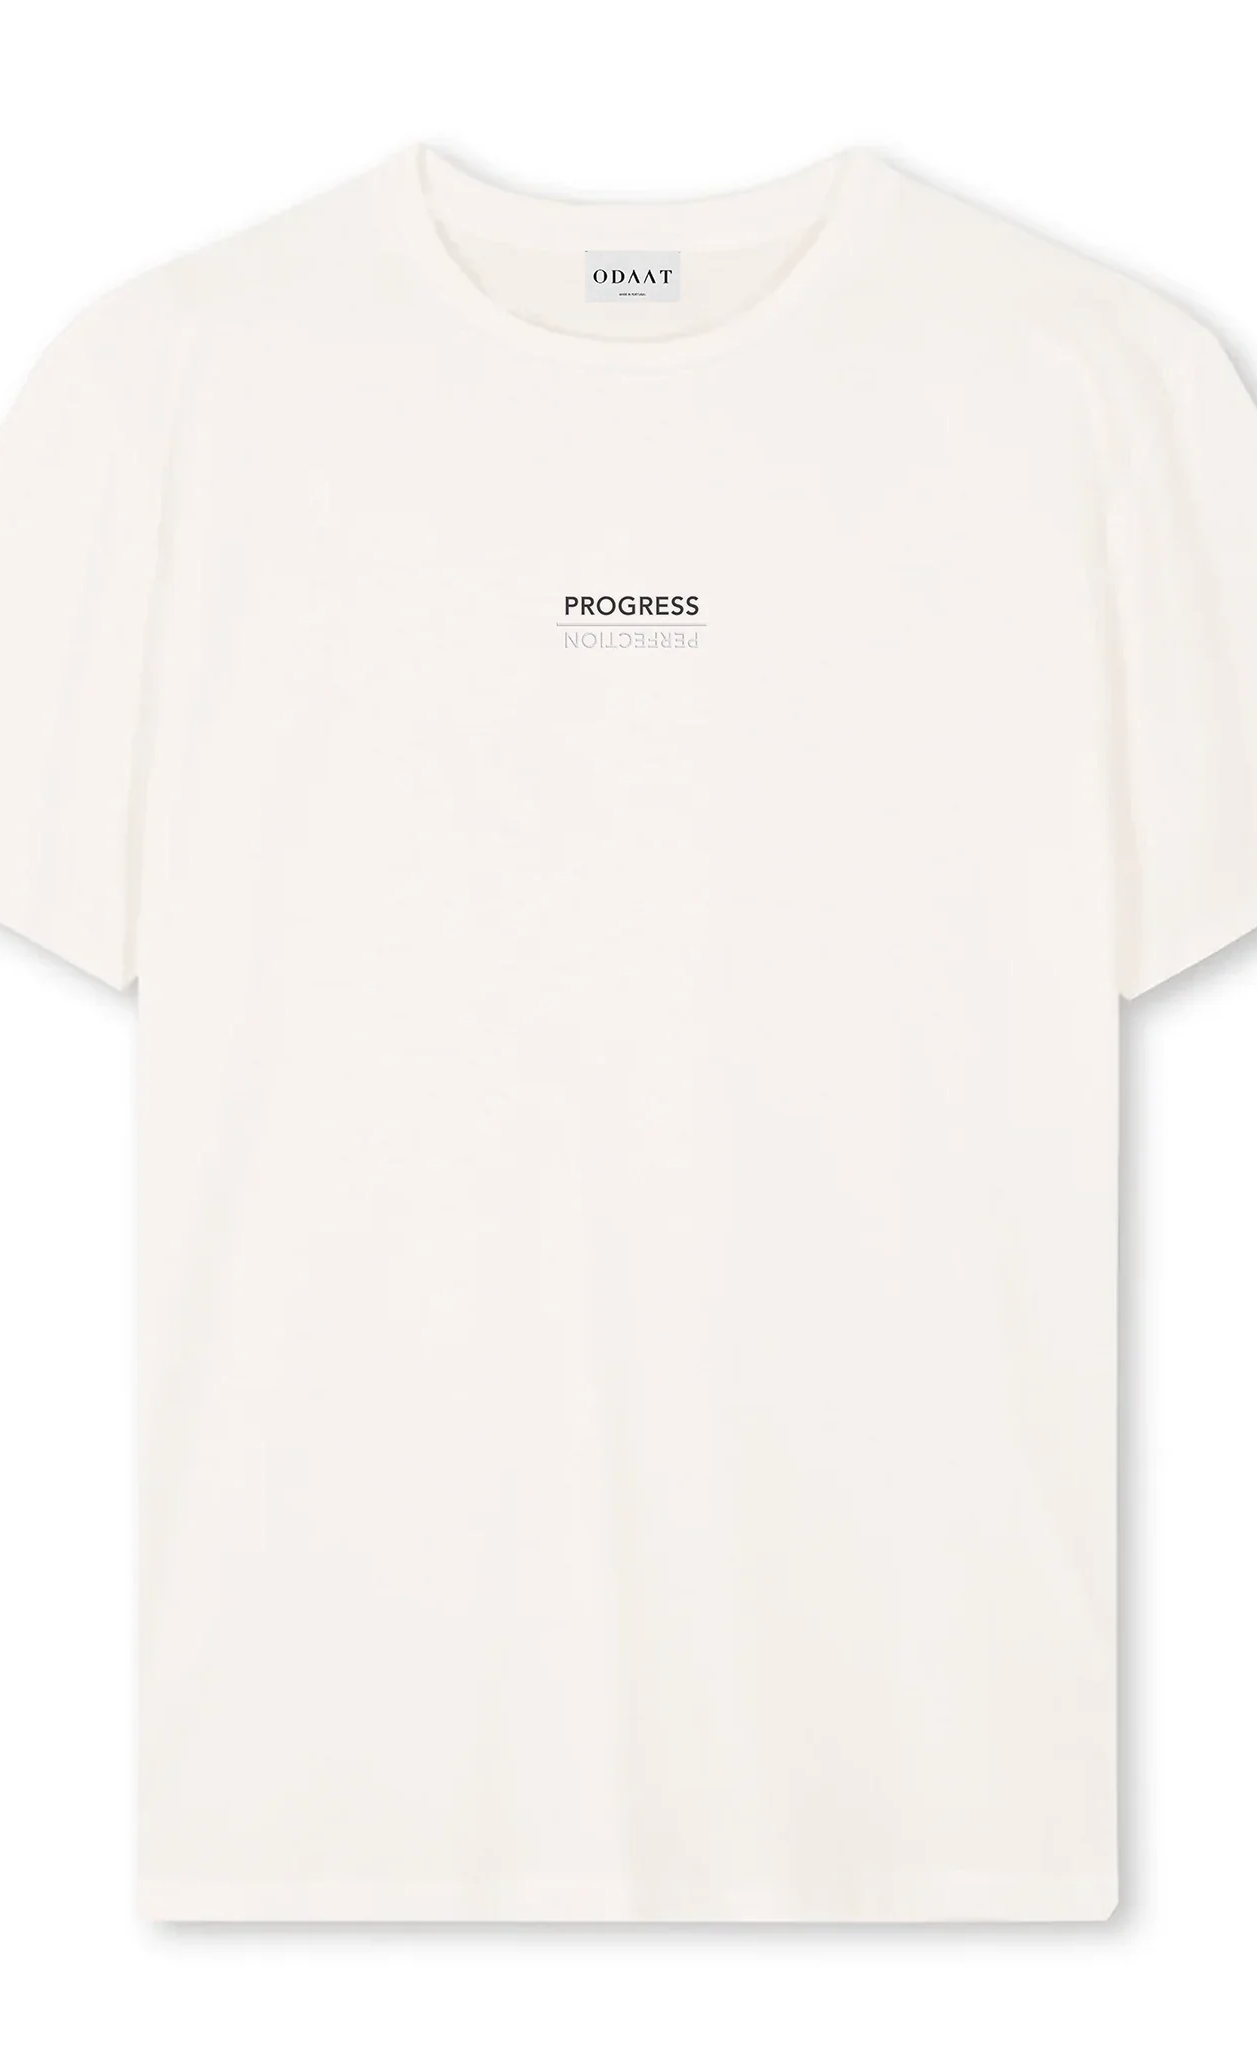 ODAAT Apparel, Progress Over Perfection T-Shirt, Vintage White